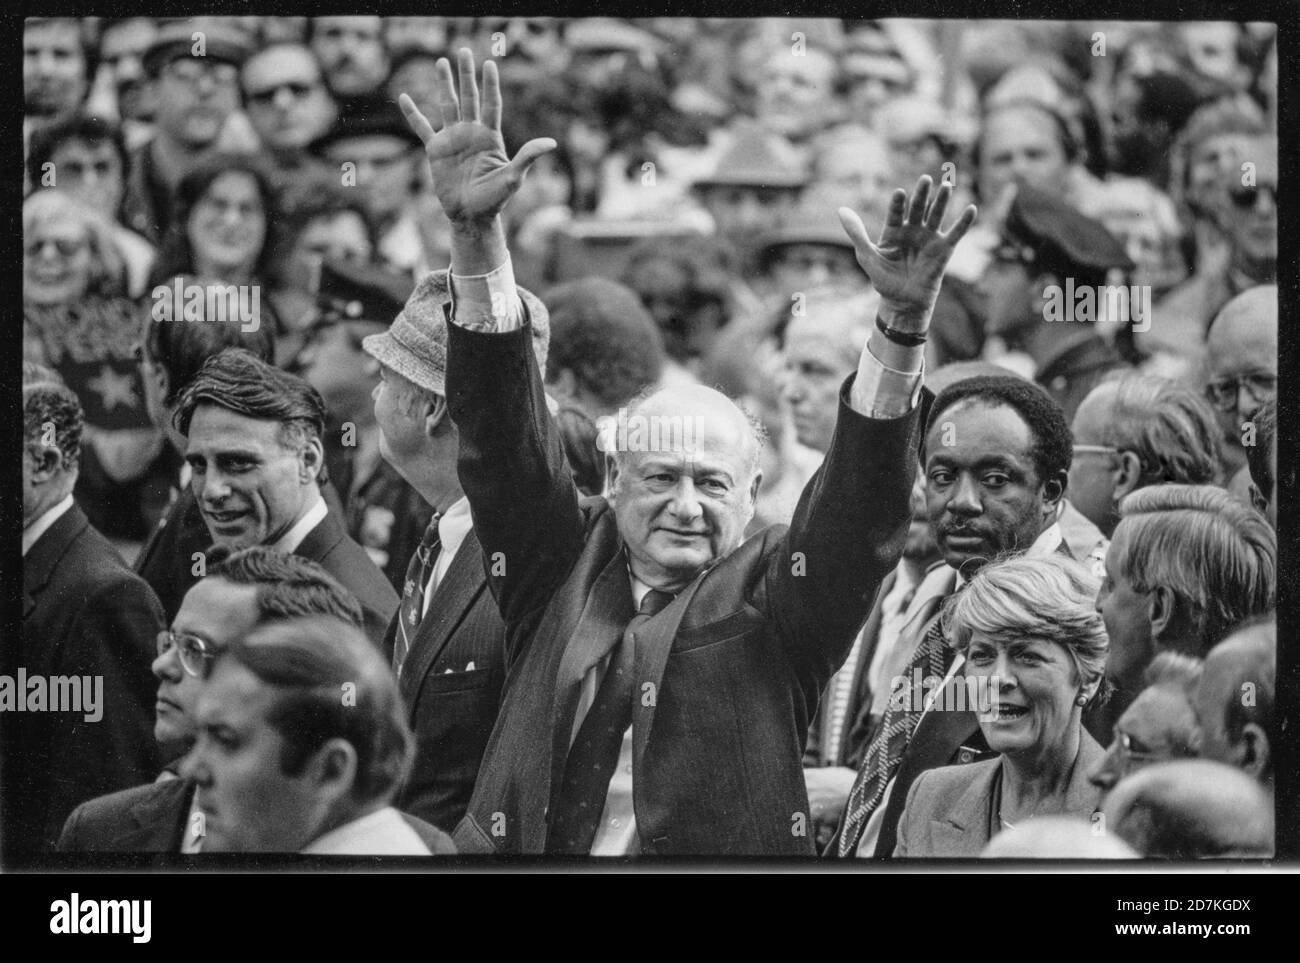 New York City Mayor Ed Koch raises his hands during a campaign event for Sen. Walter Mondale and Geraldine Ferraro in New York on October 15, 1984.  Photo by Francis Specker Stock Photo